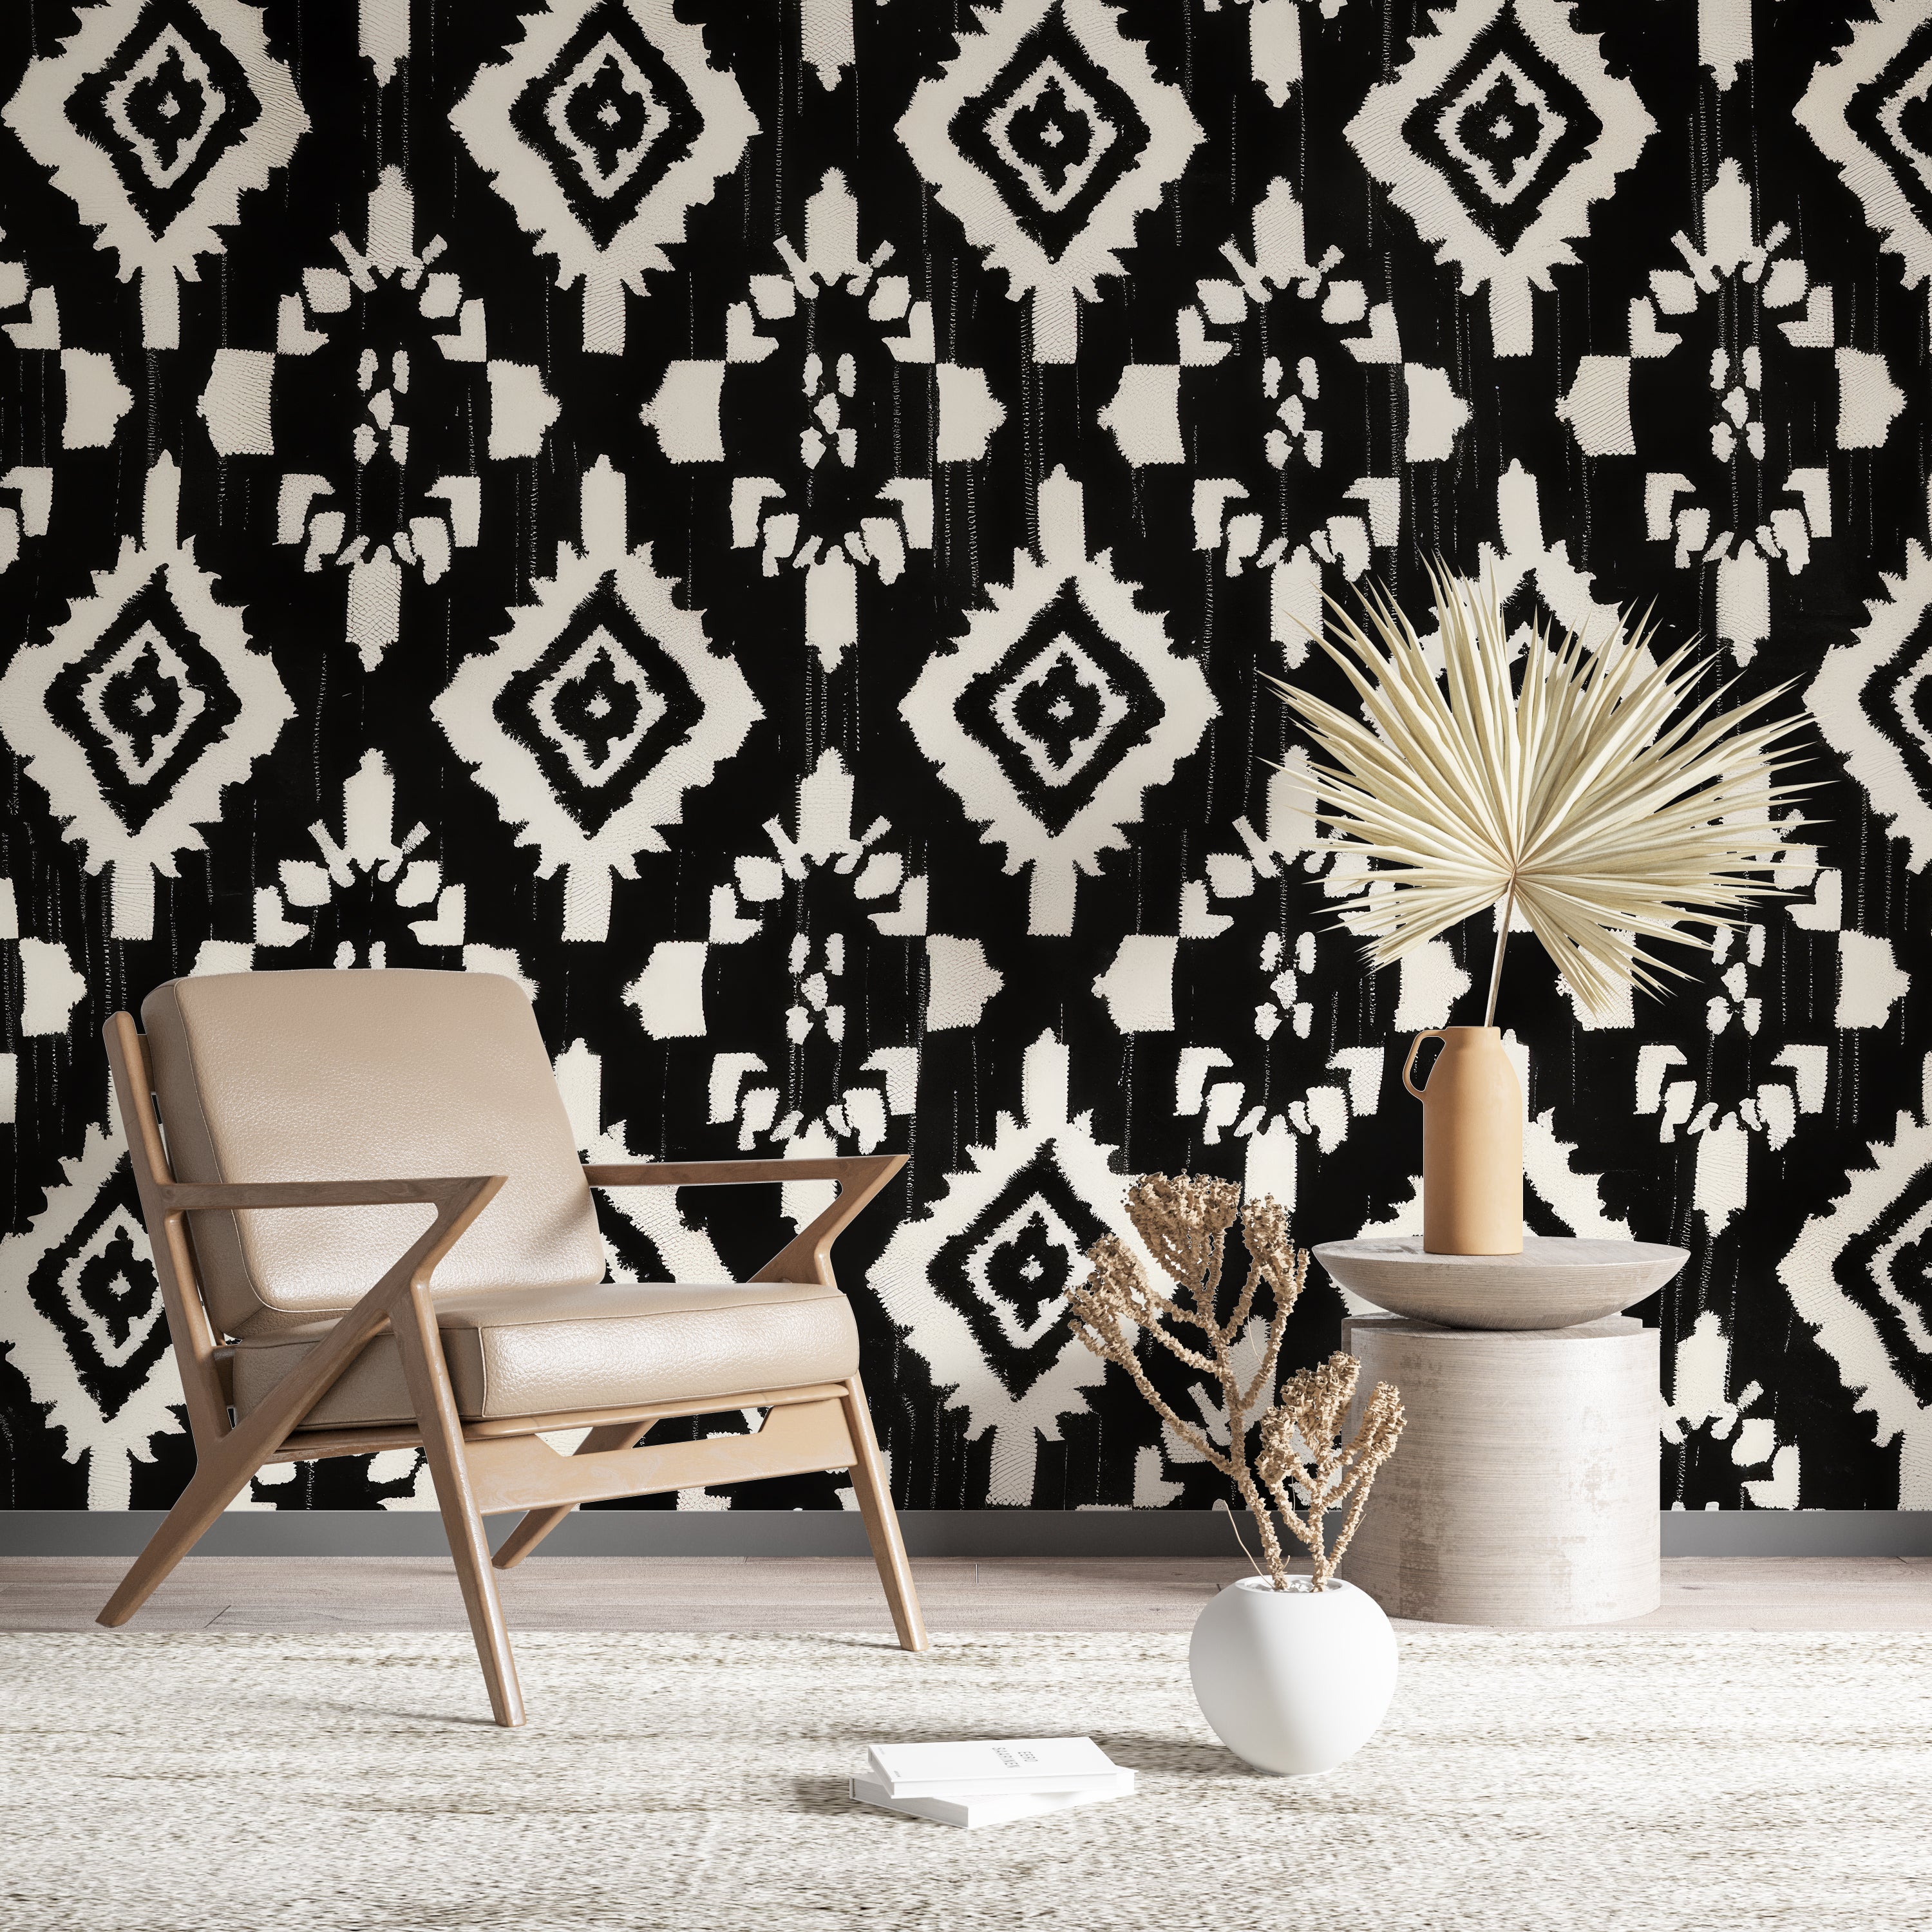 Black and white woven geometry